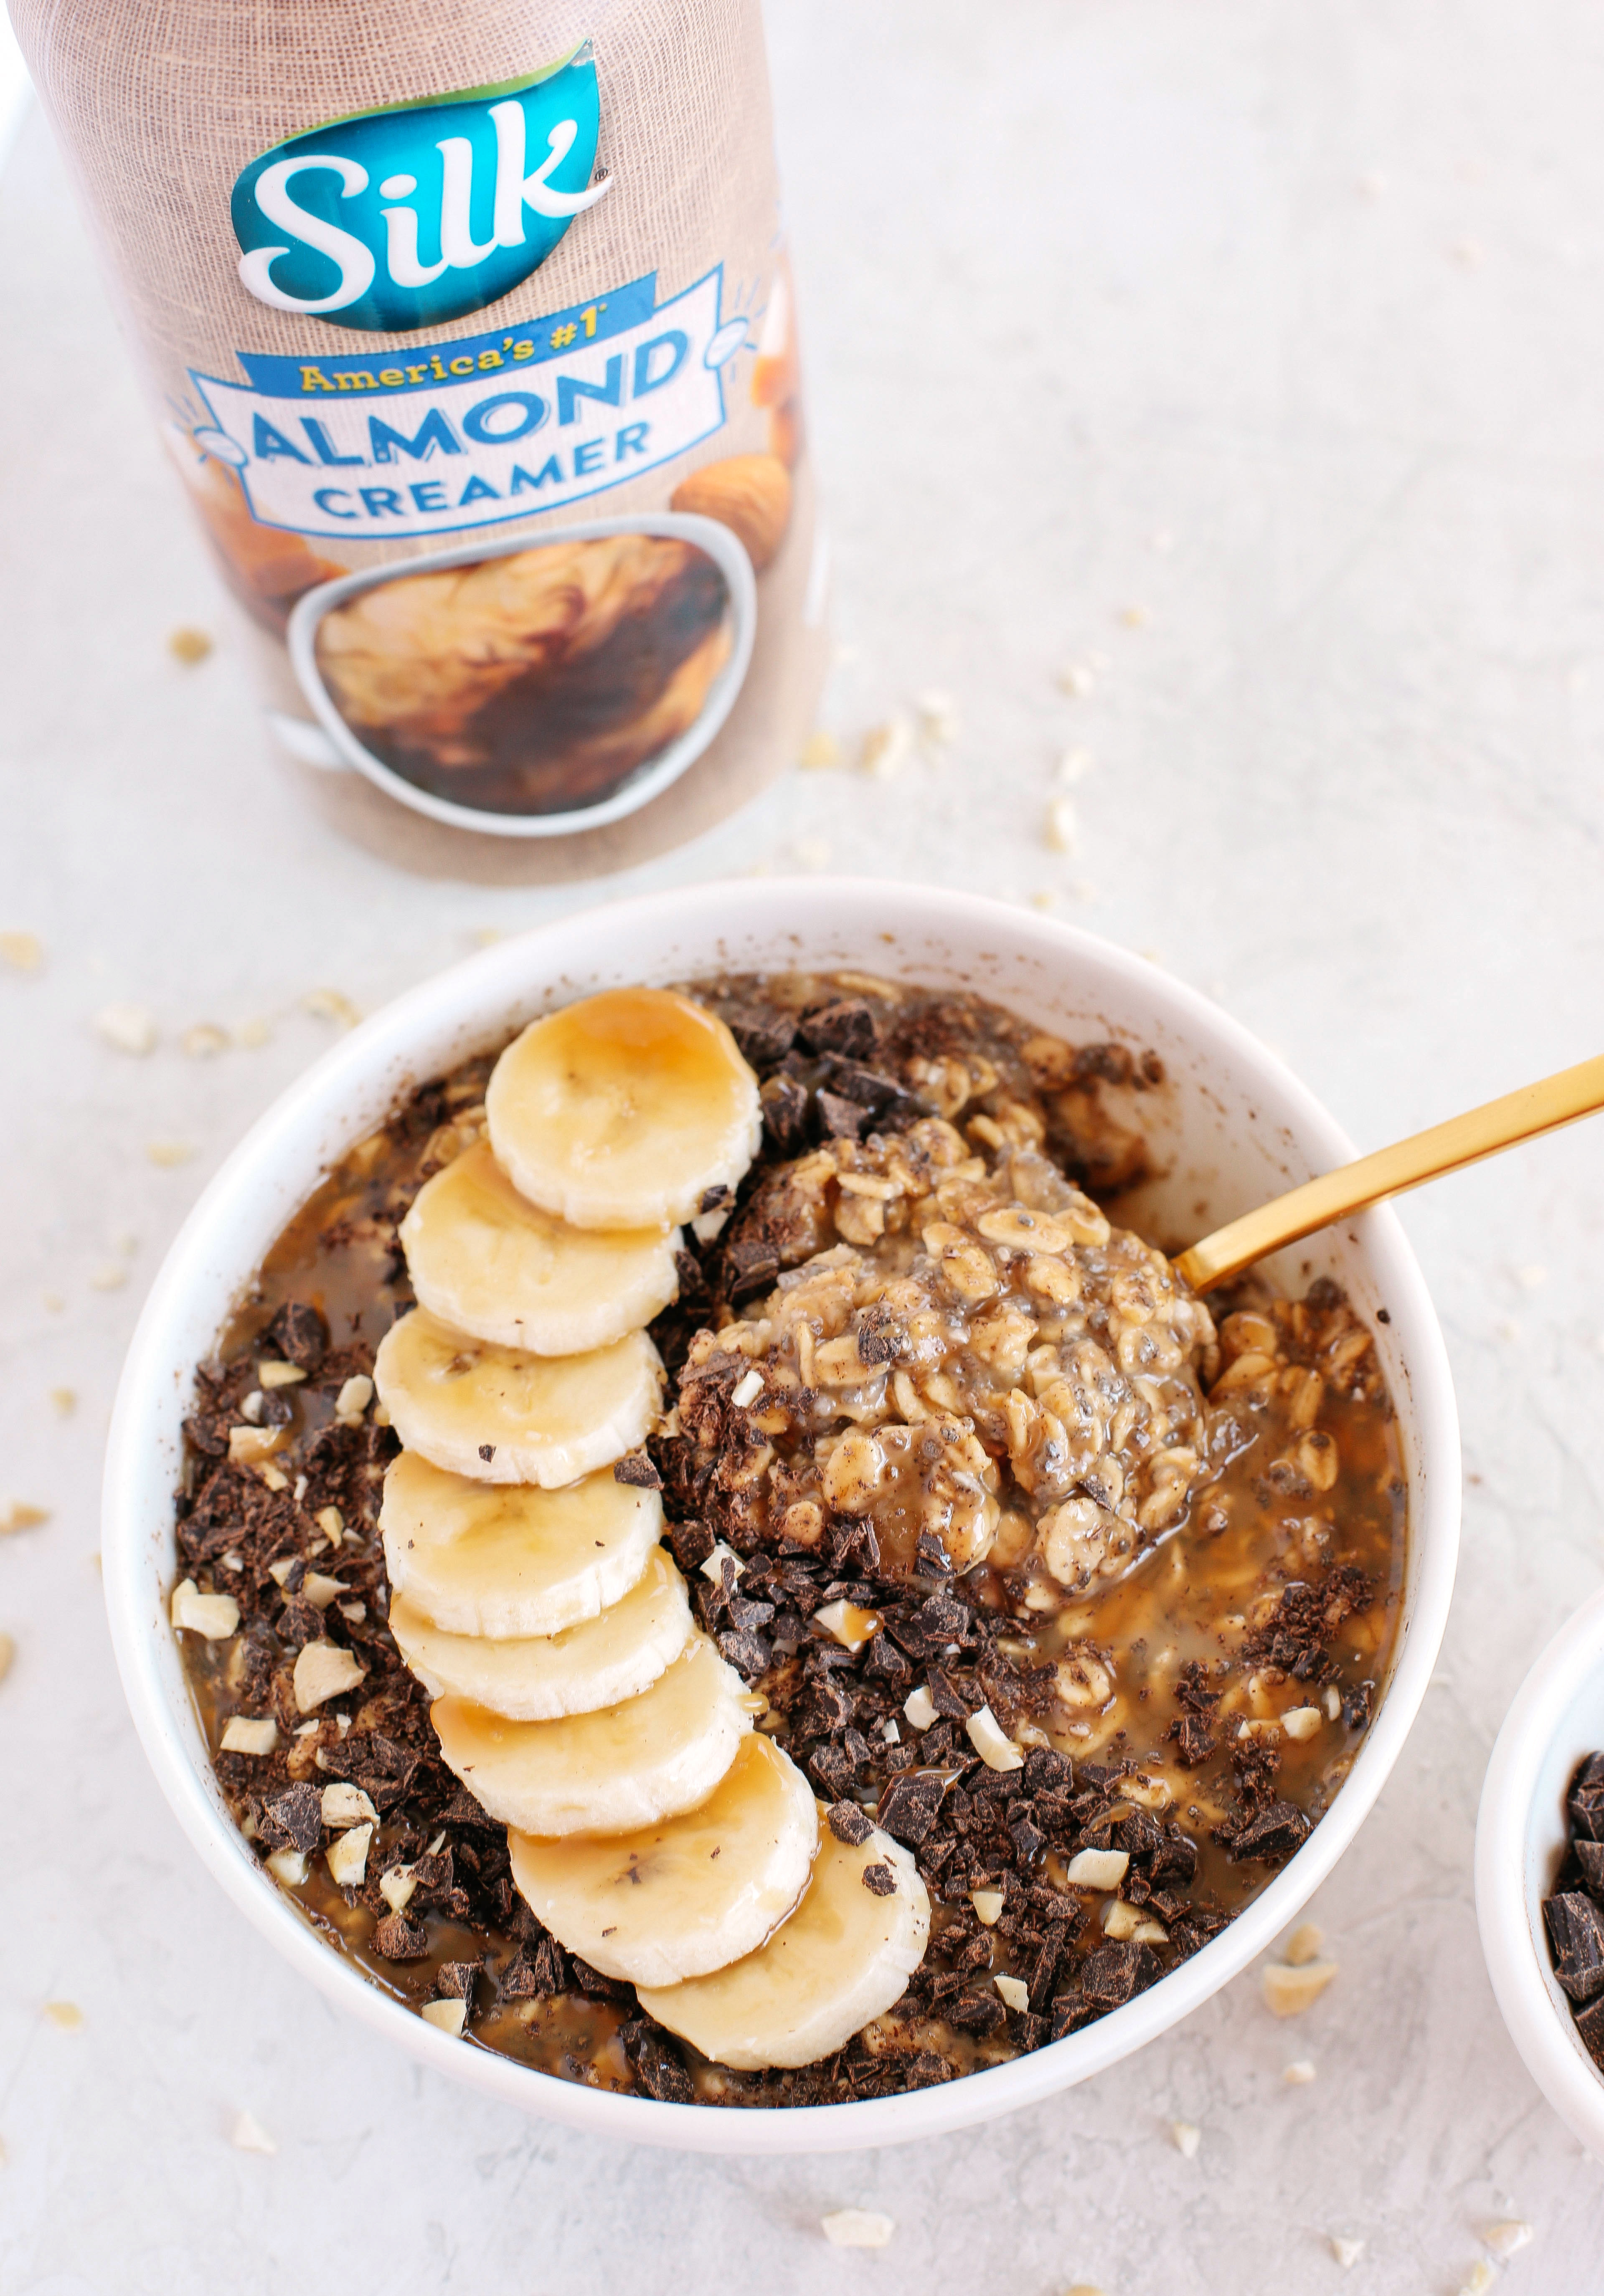 Salted Caramel Overnight Oats drizzled with a sweet homemade caramel sauce easily made in just minutes the night before giving you a deliciously decadent breakfast as soon as you wake up!